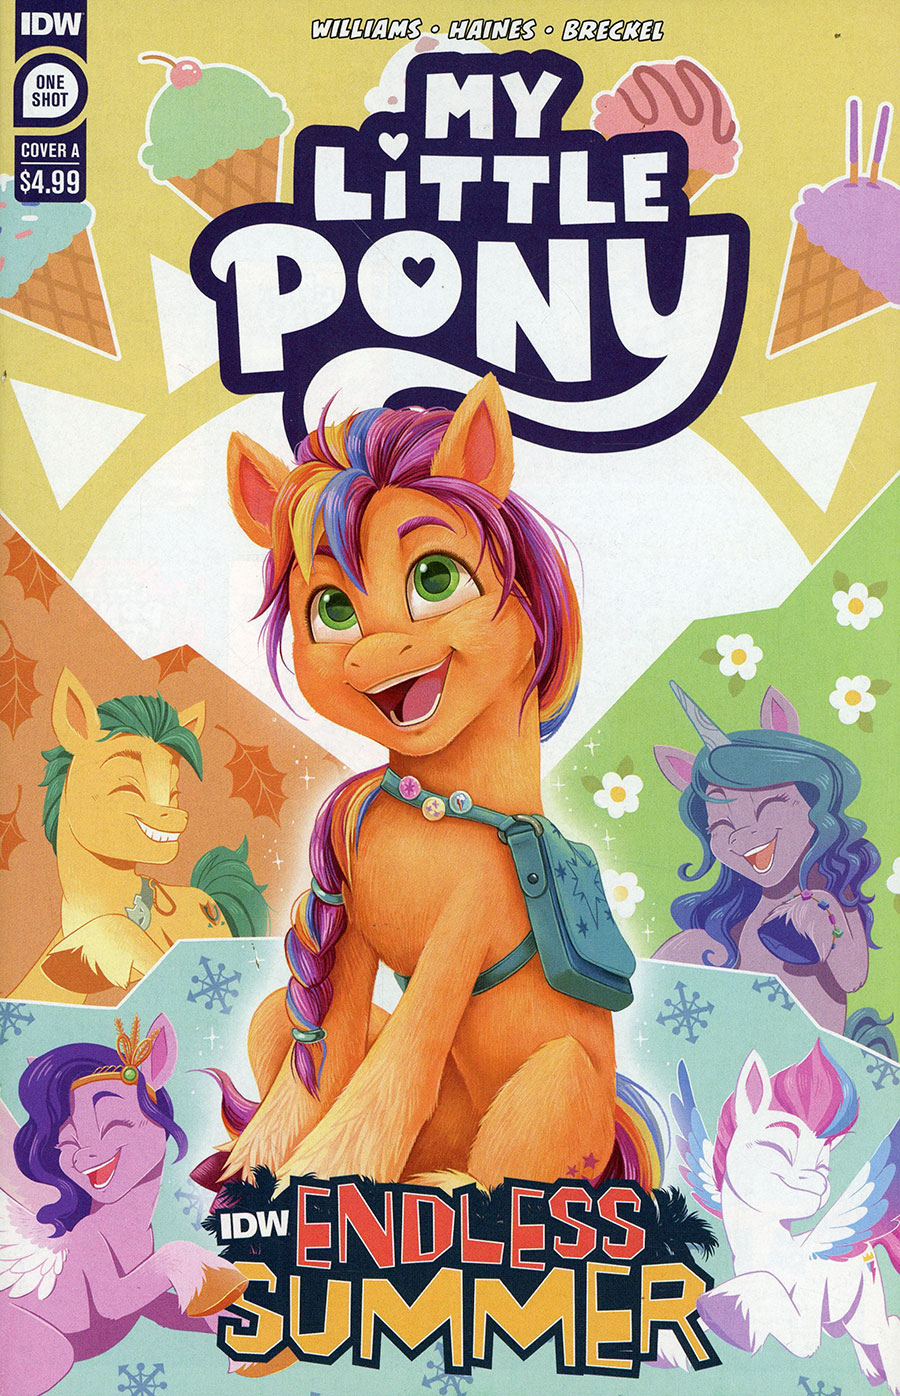 IDW Endless Summer My Little Pony #1 (One Shot) Cover A Regular Natalie Haines Cover